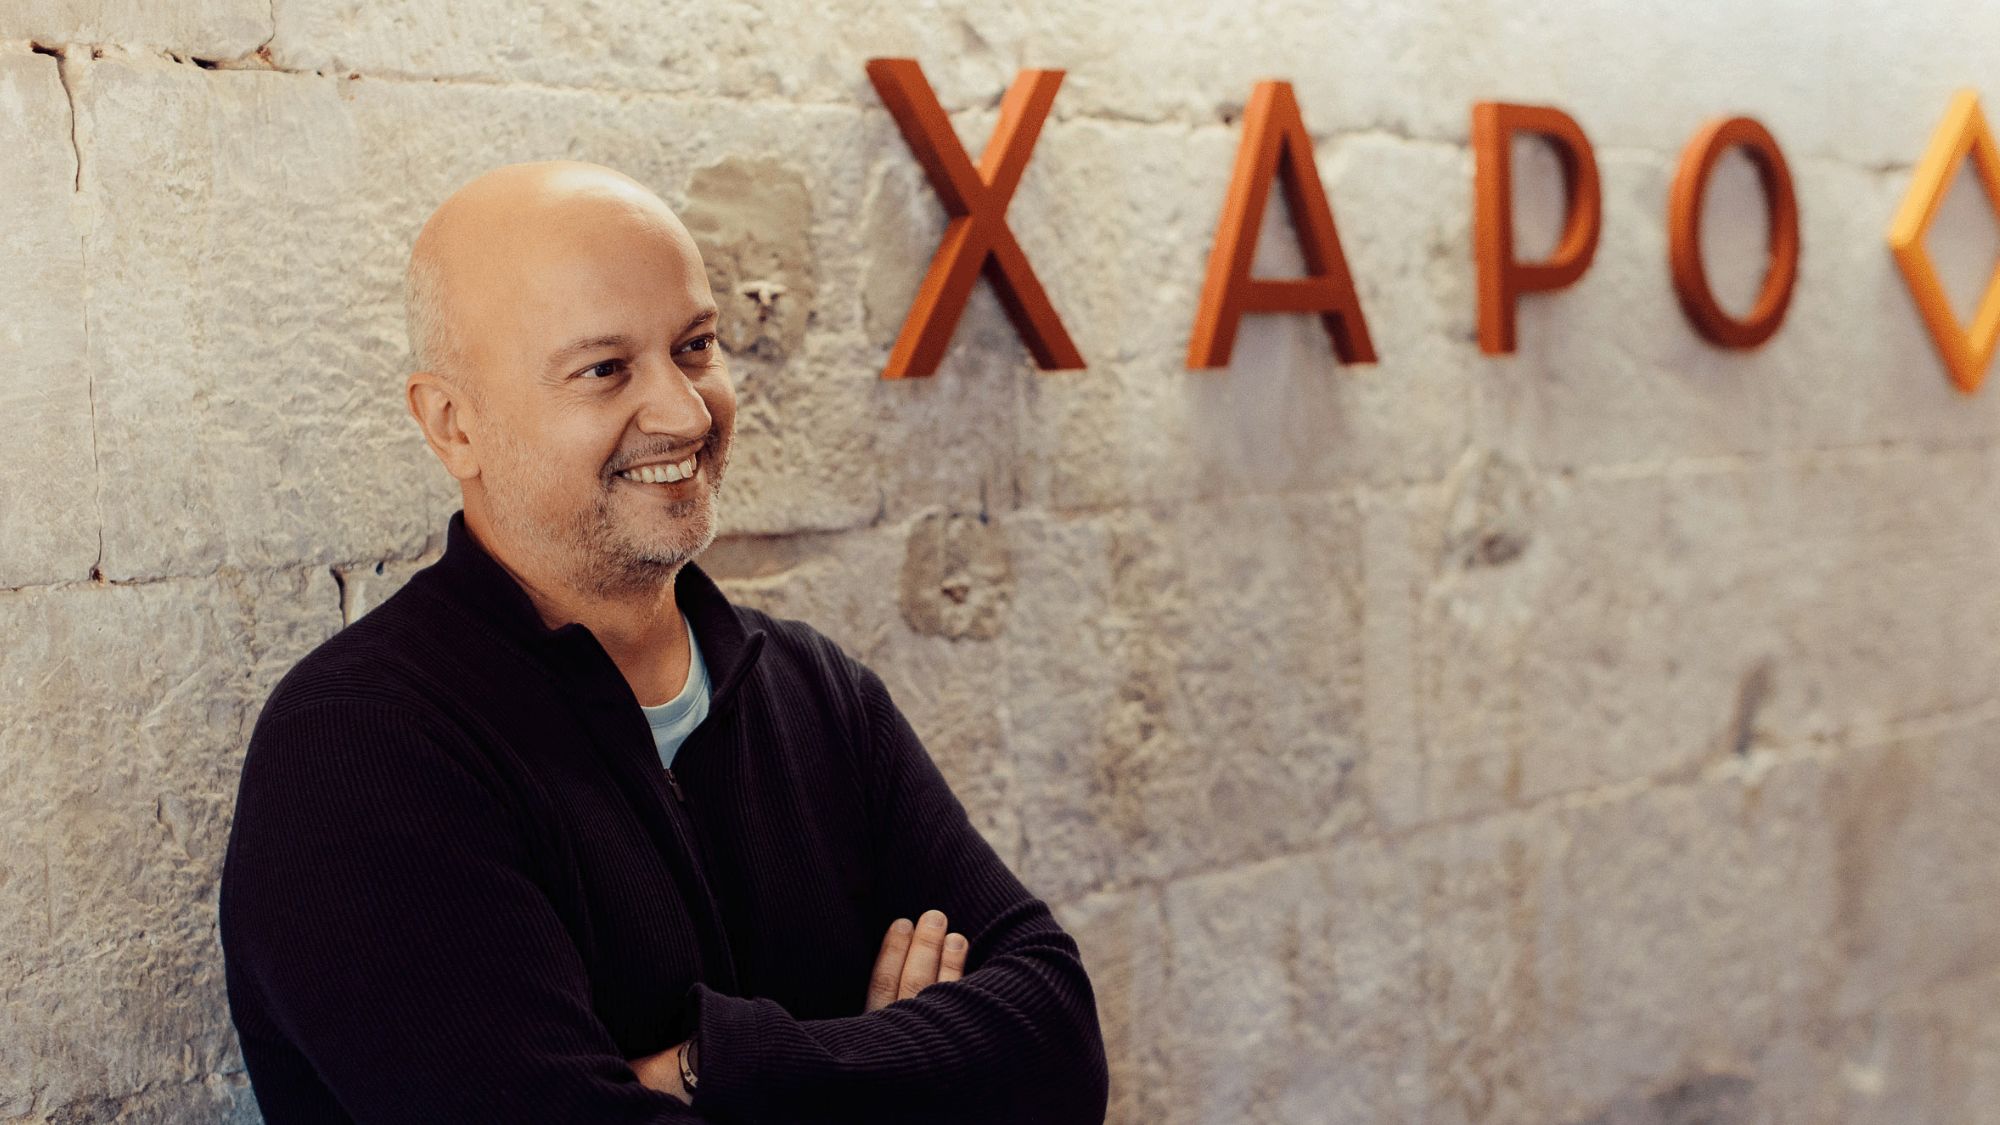 Xapo CEO: A Bitcoin Could Be Worth $1M in 10 Years